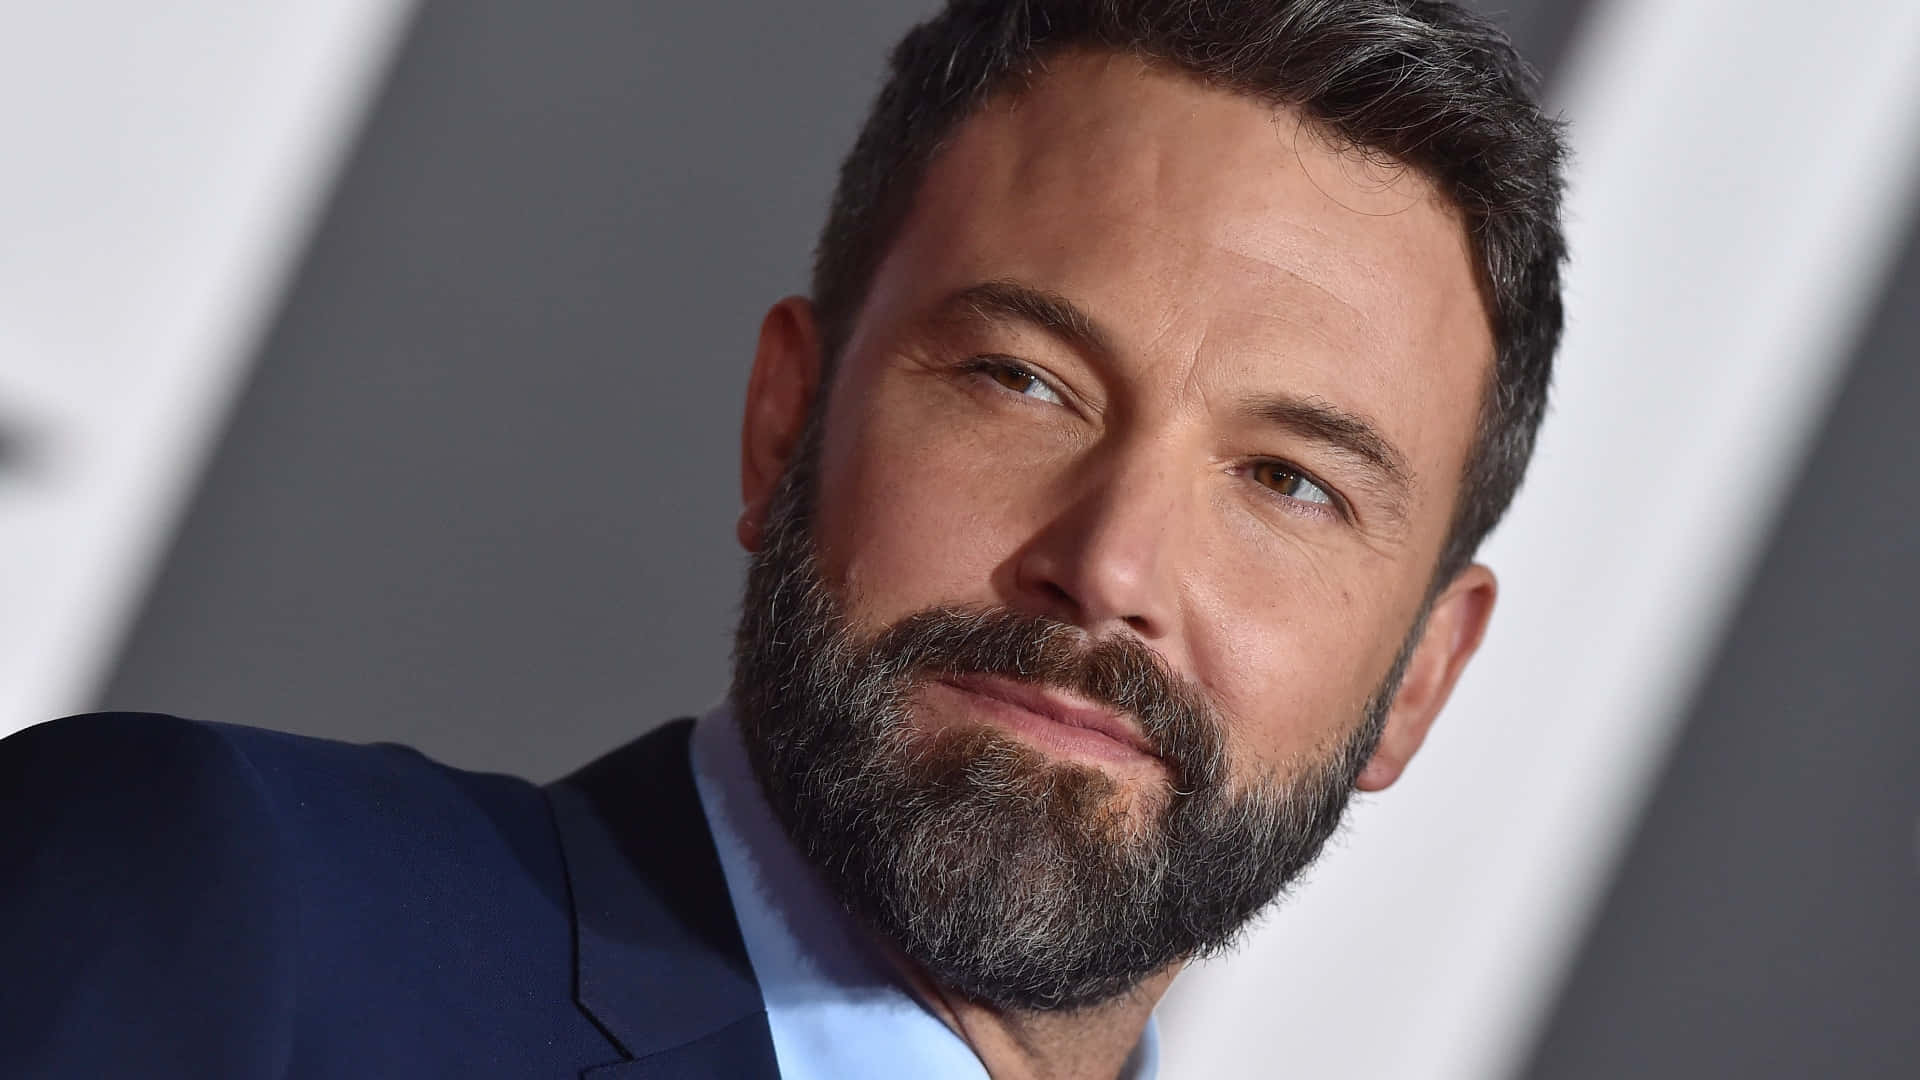 Ben Affleck Looking Refined in a Blue Suit